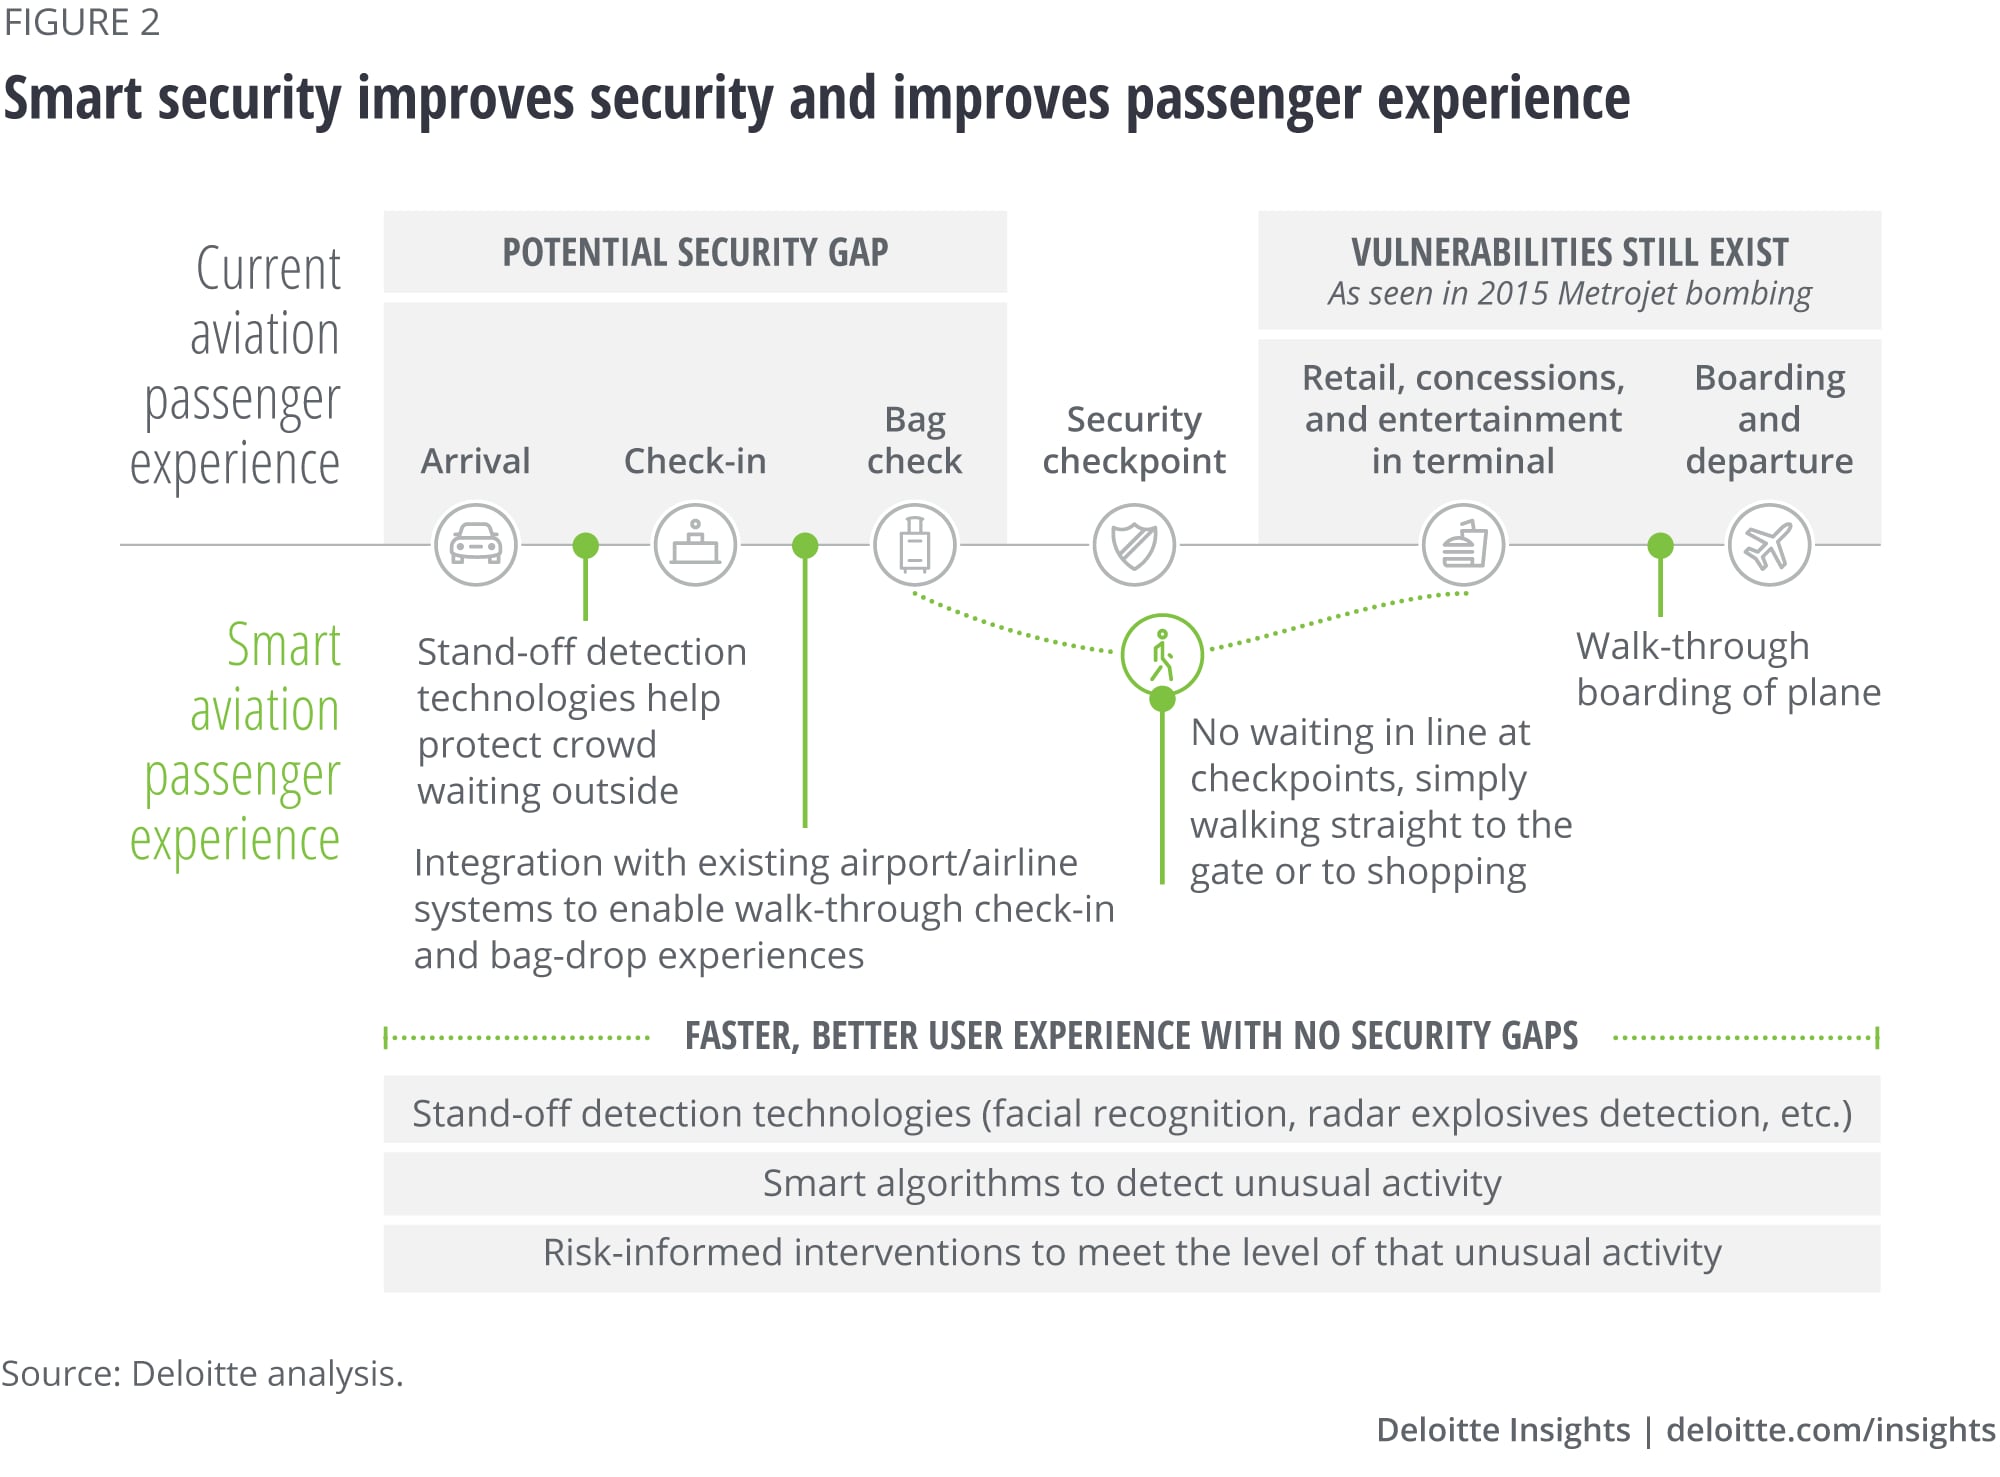 Smart security improves security and improves passenger experience